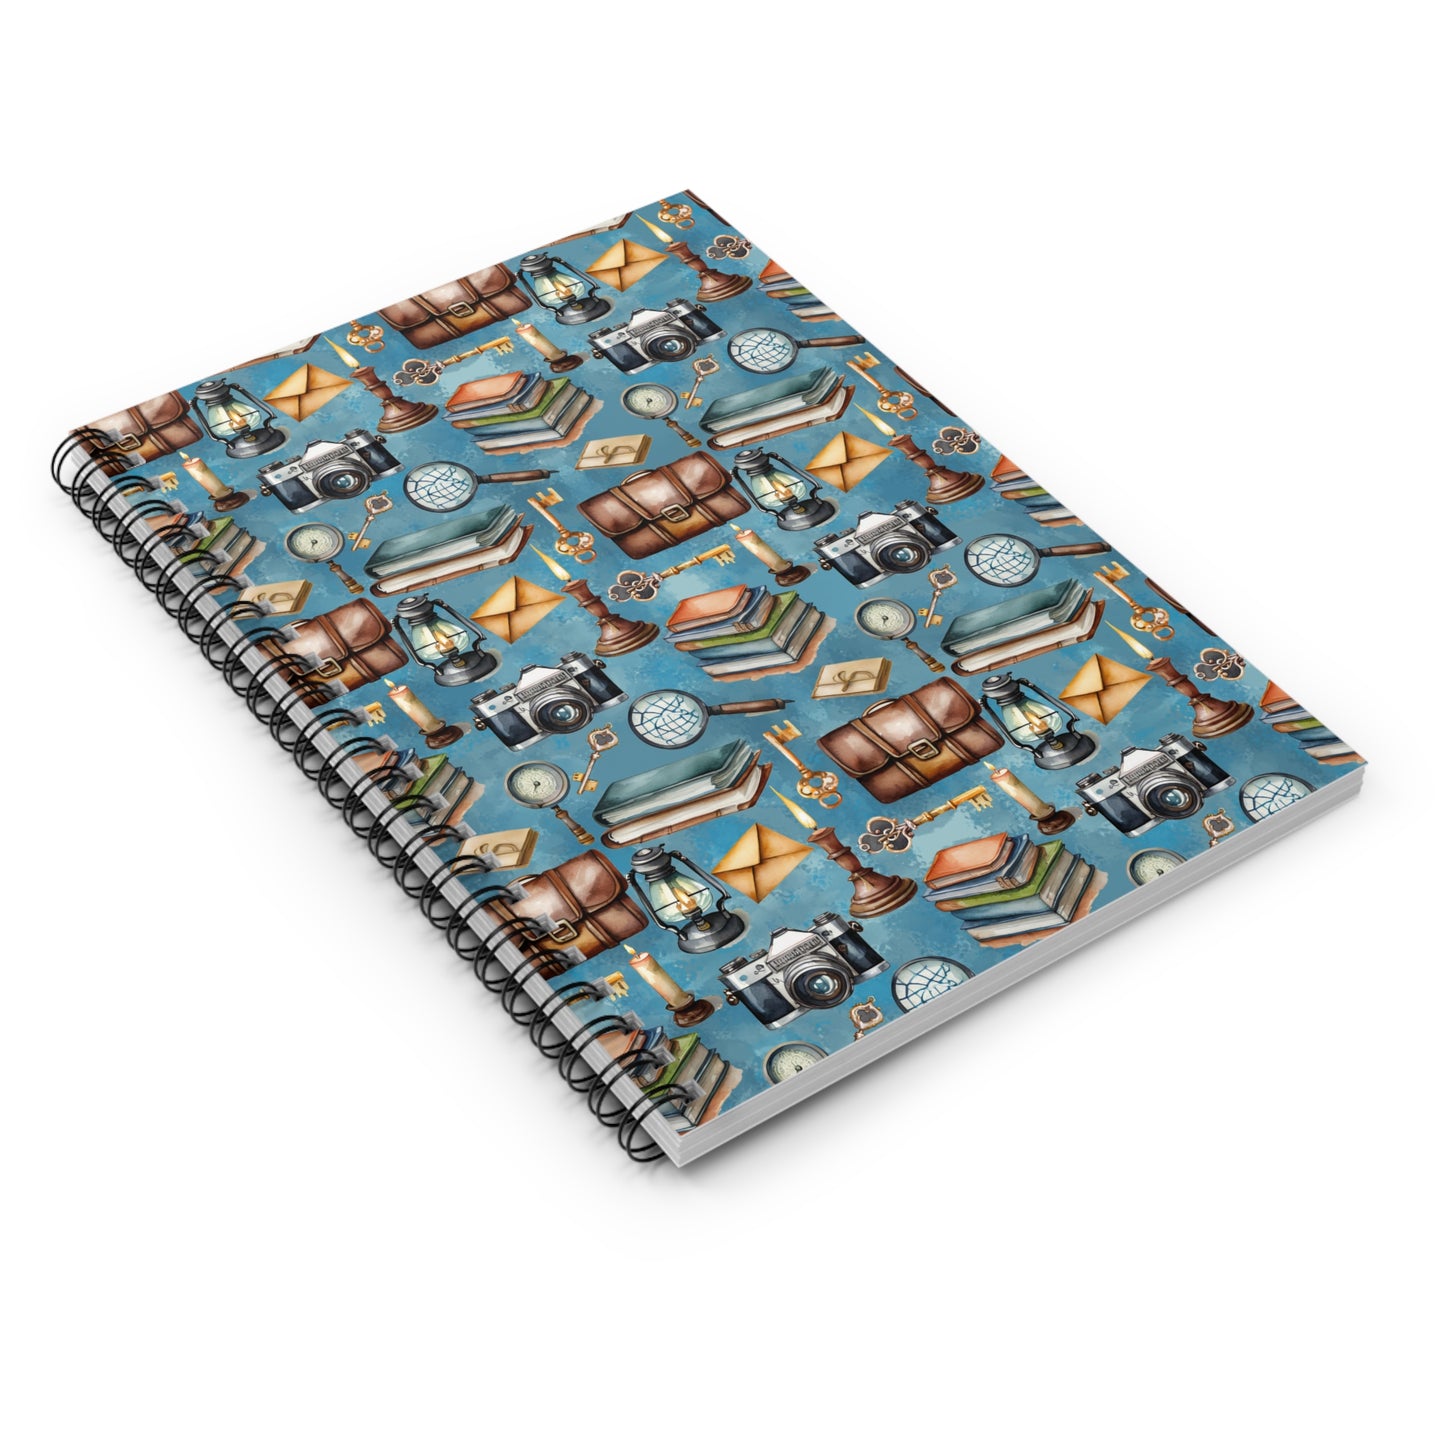 Detective Blues Spiral Notebook - Ruled Line